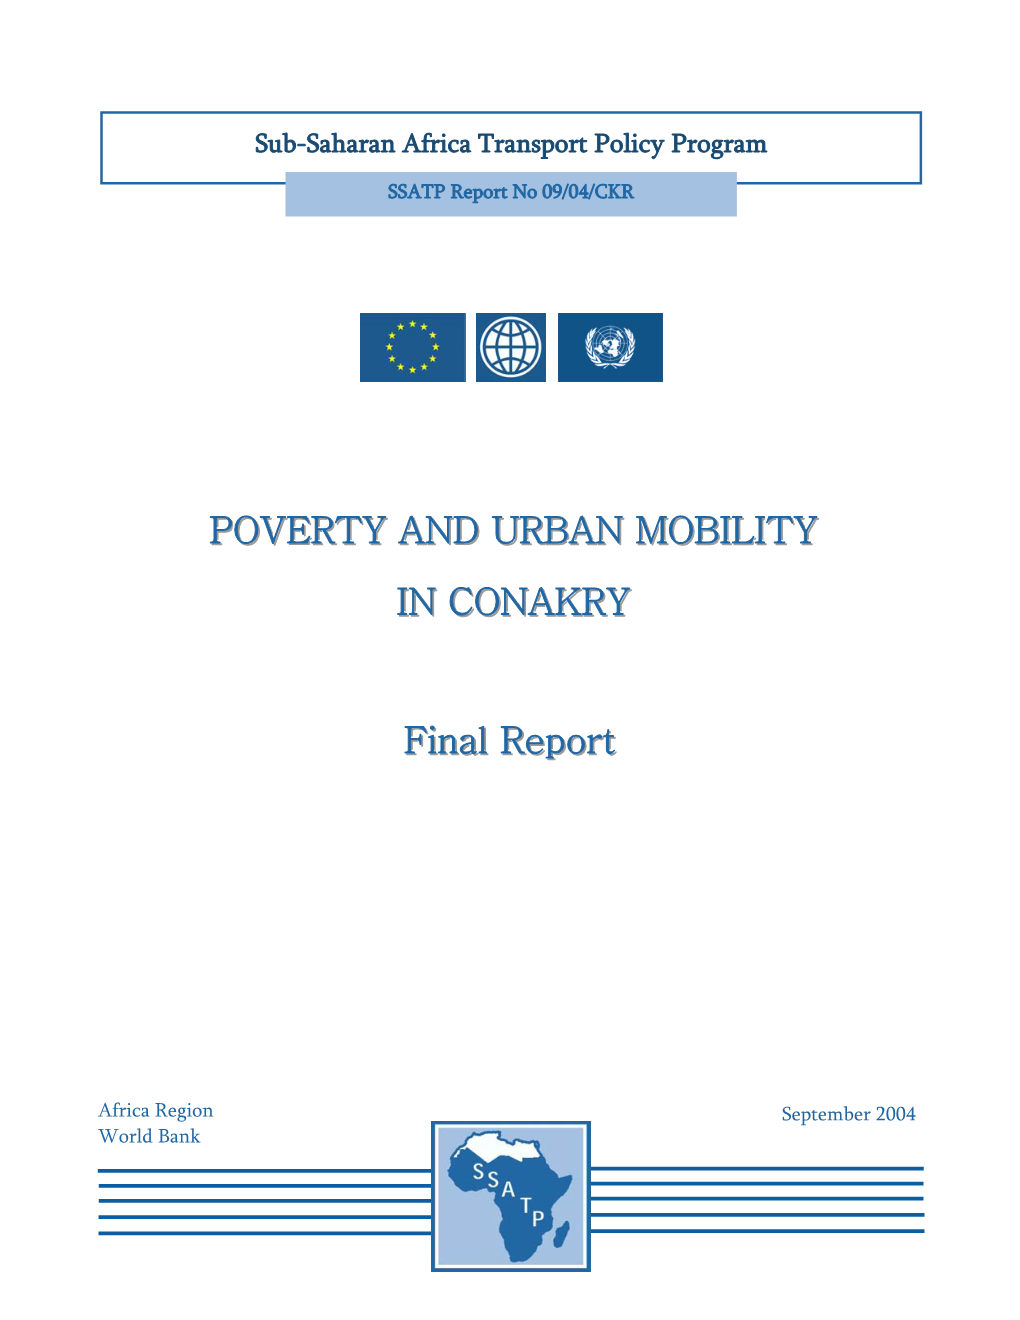 POVERTY and URBAN MOBILITY in CONAKRY Final Report